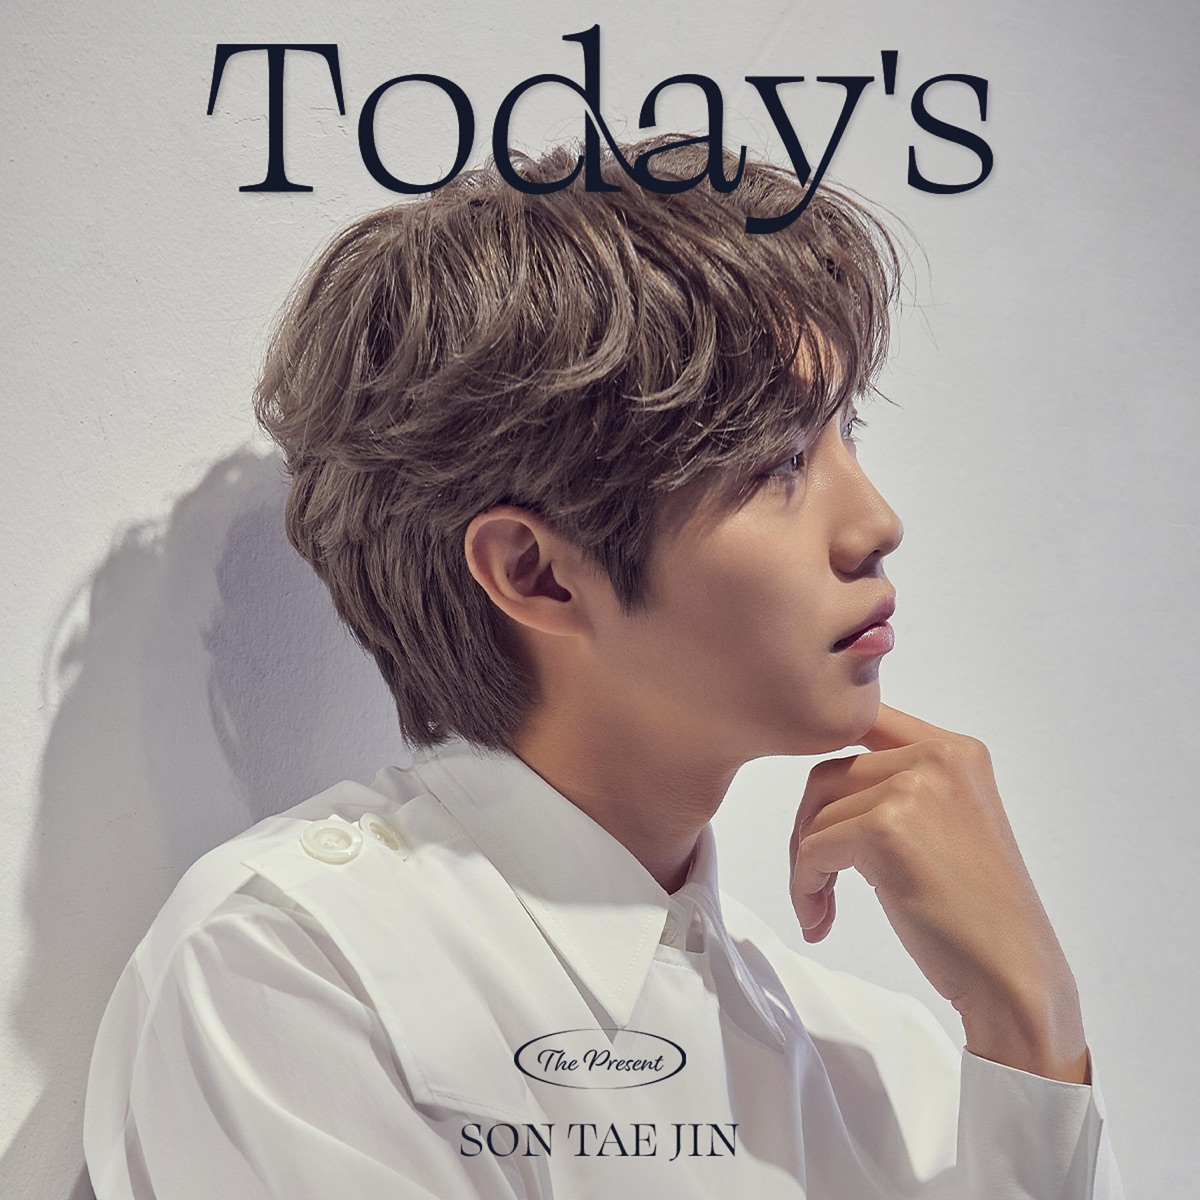 Tae Jin Son – The Present ‘Today’s’ – EP